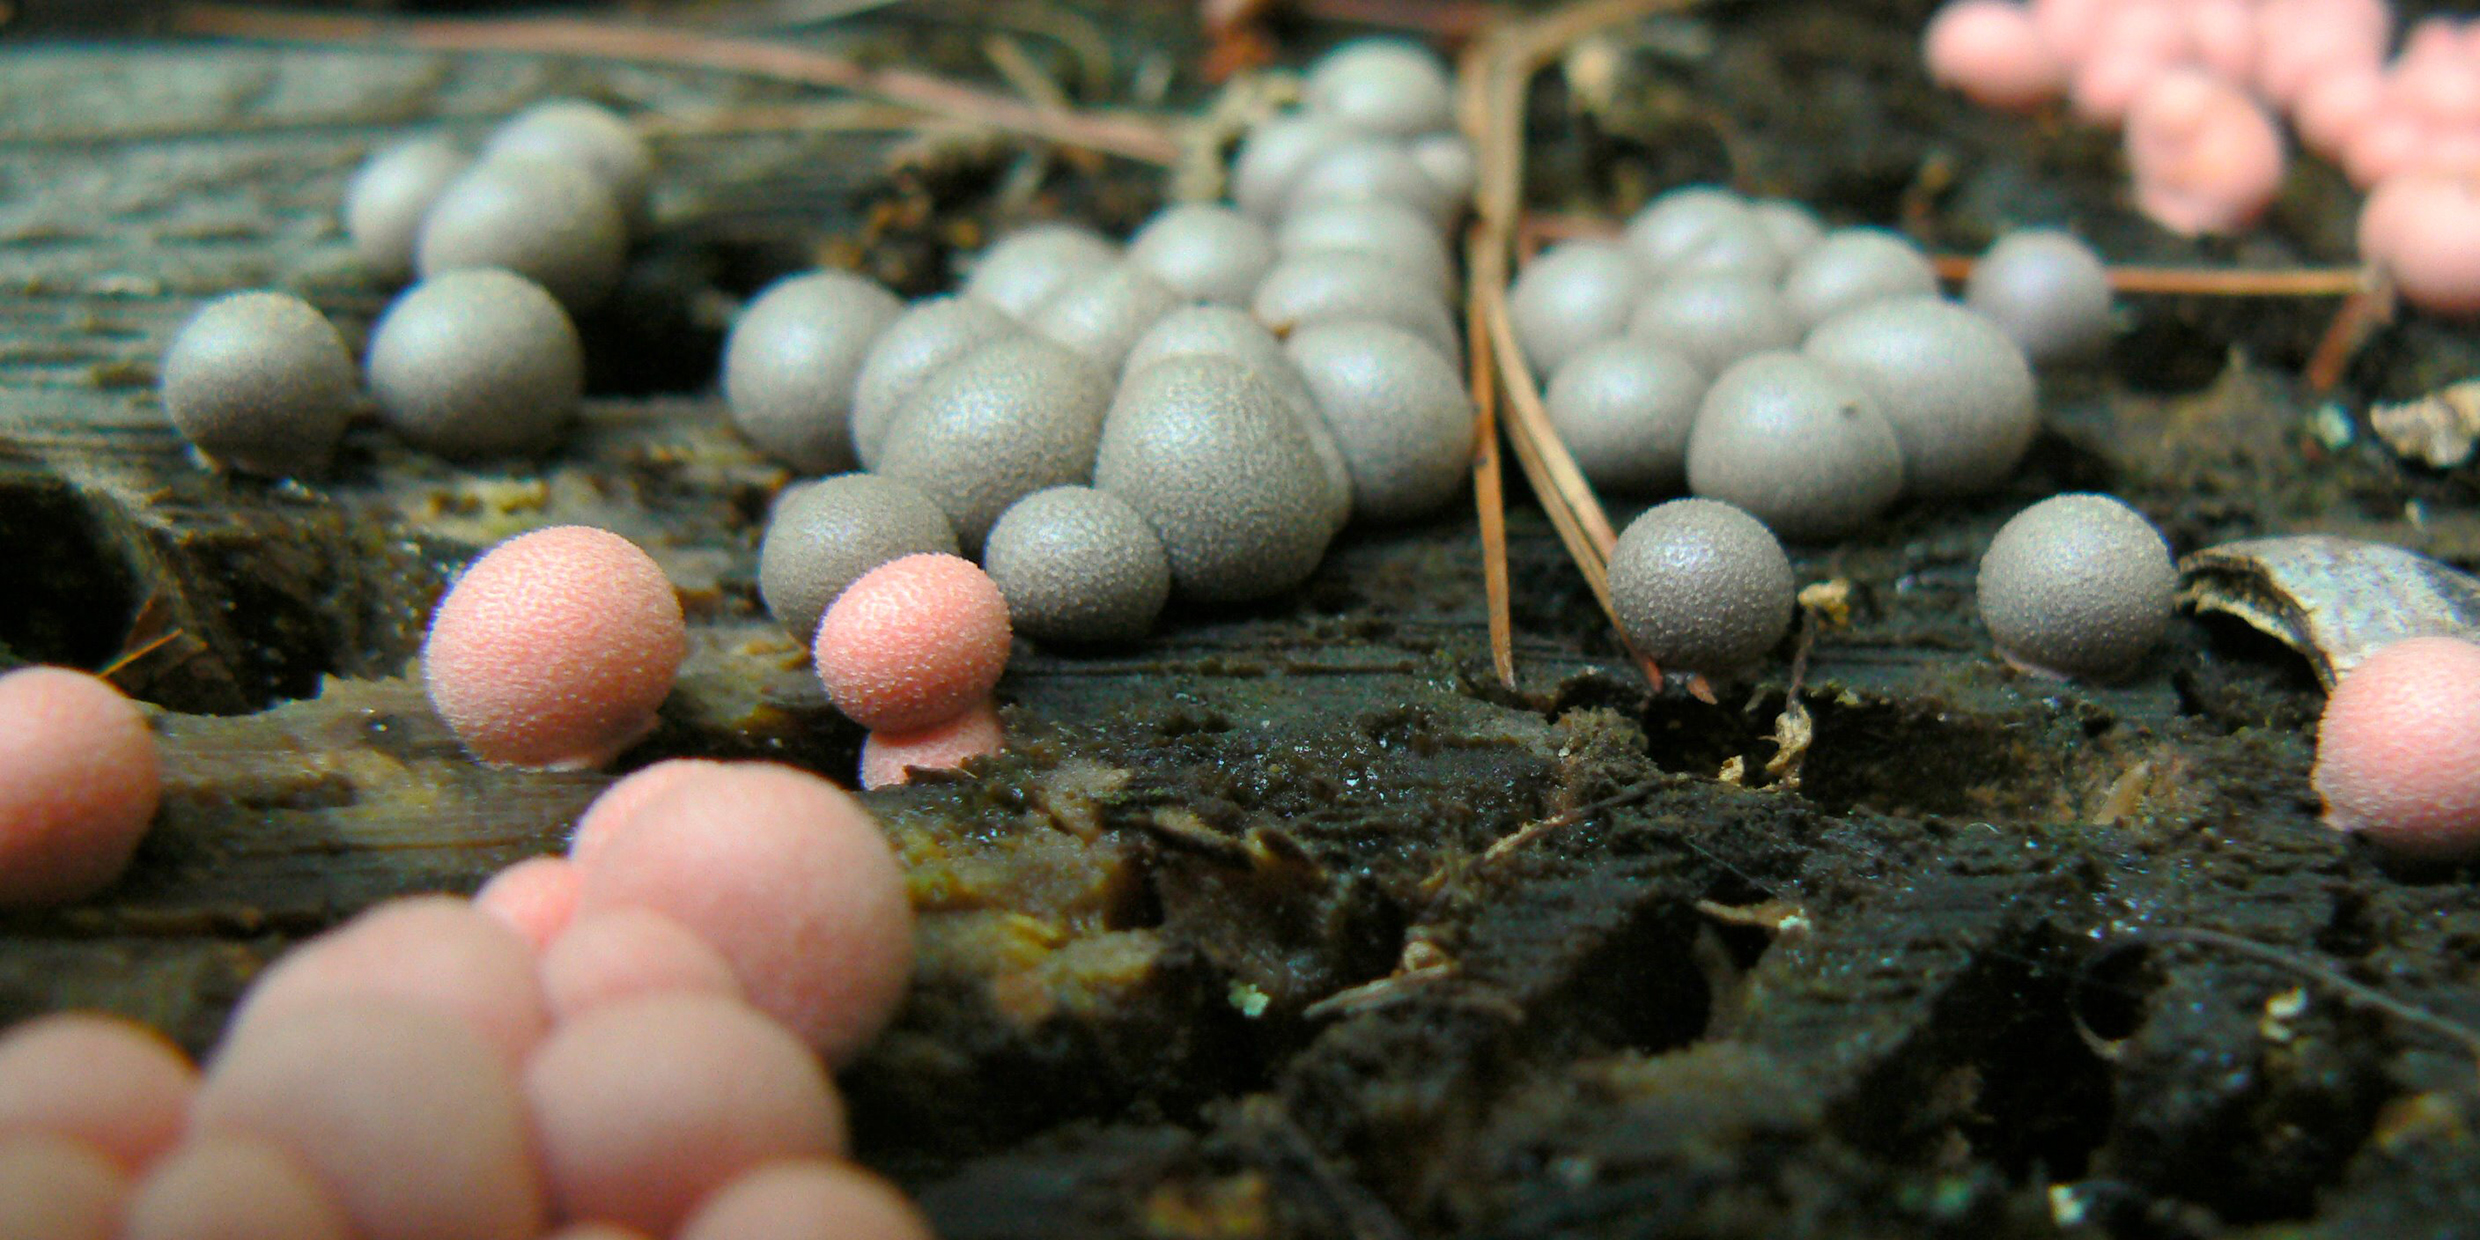 Image of pink and white spheres growing from a dead log